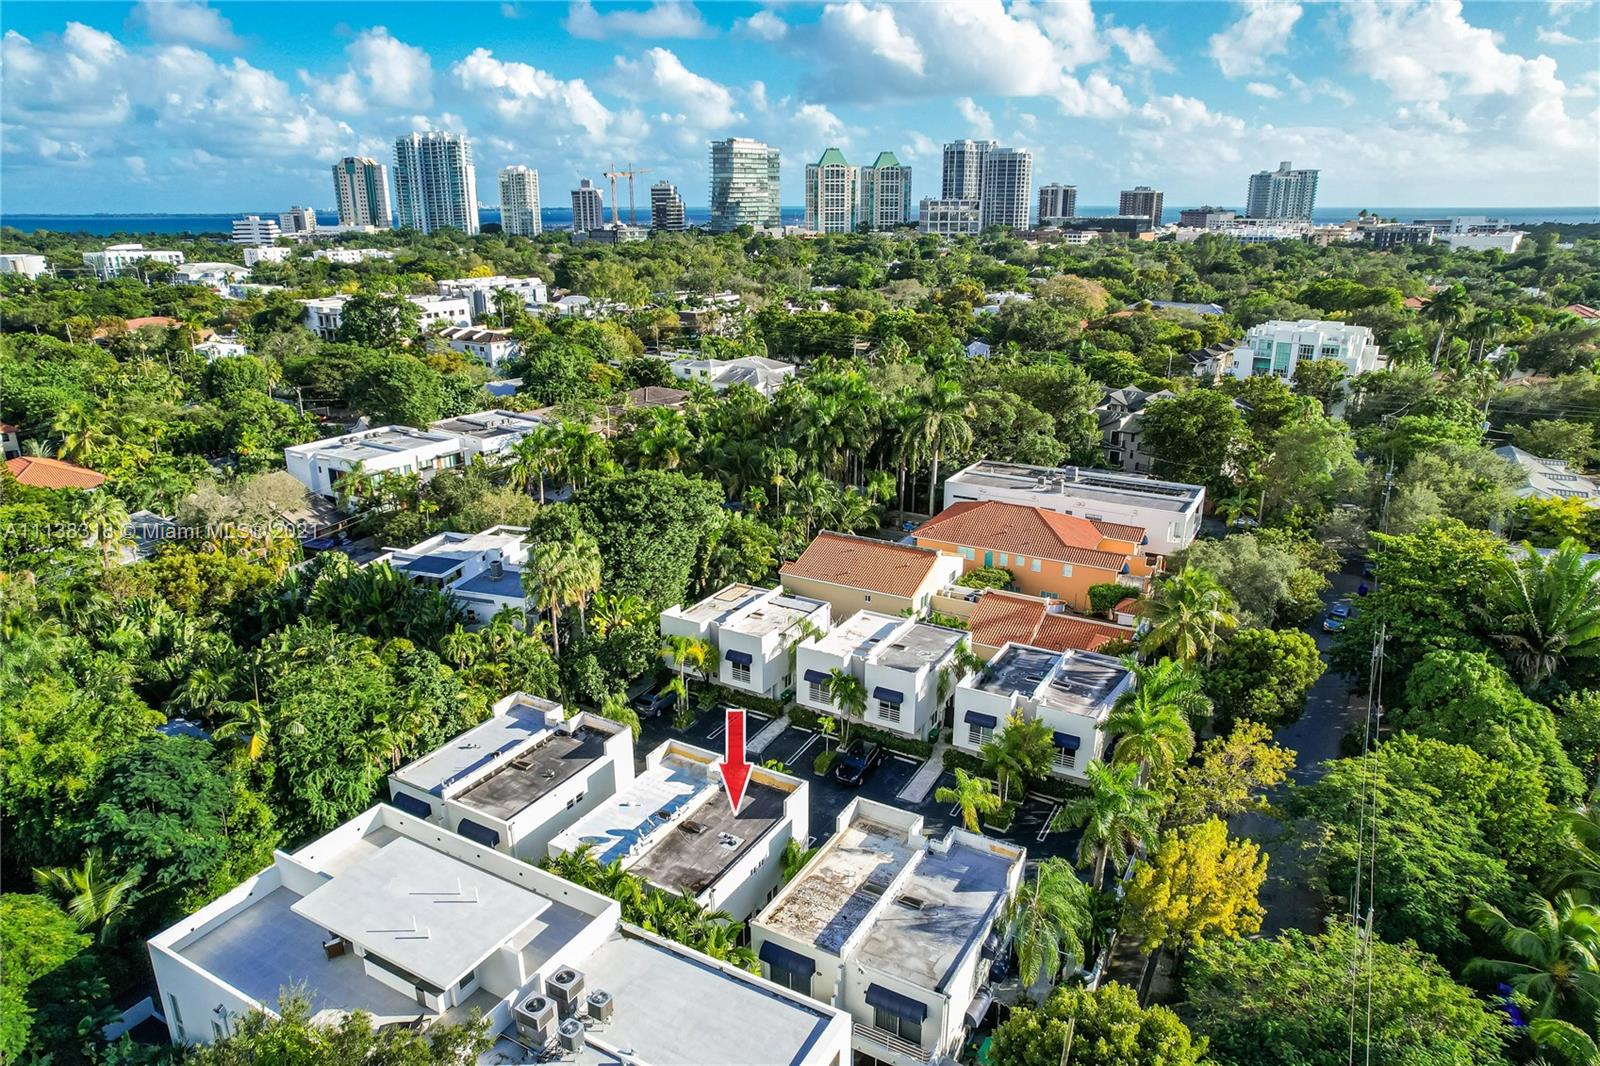 NEW LISTING IN COCONUT GROVE!!! 2BD/2.5BA split plan 2 stories townhome in a secure gated complex. Rarely on the market… alfresco secluded tropical setting in the heart of Coconut Grove. 2 outdoor terraces, 2 assigned parking spaces, lots of natural light also included 2nd floor skylight ceiling fixture, new flooring in the first floor, remodeled bathrooms and kitchen.  Only 12 units in the complex with a private community swimming pool and very large green area. A must see!!! Exclusively represented by Angielle Knowle, easy to show….